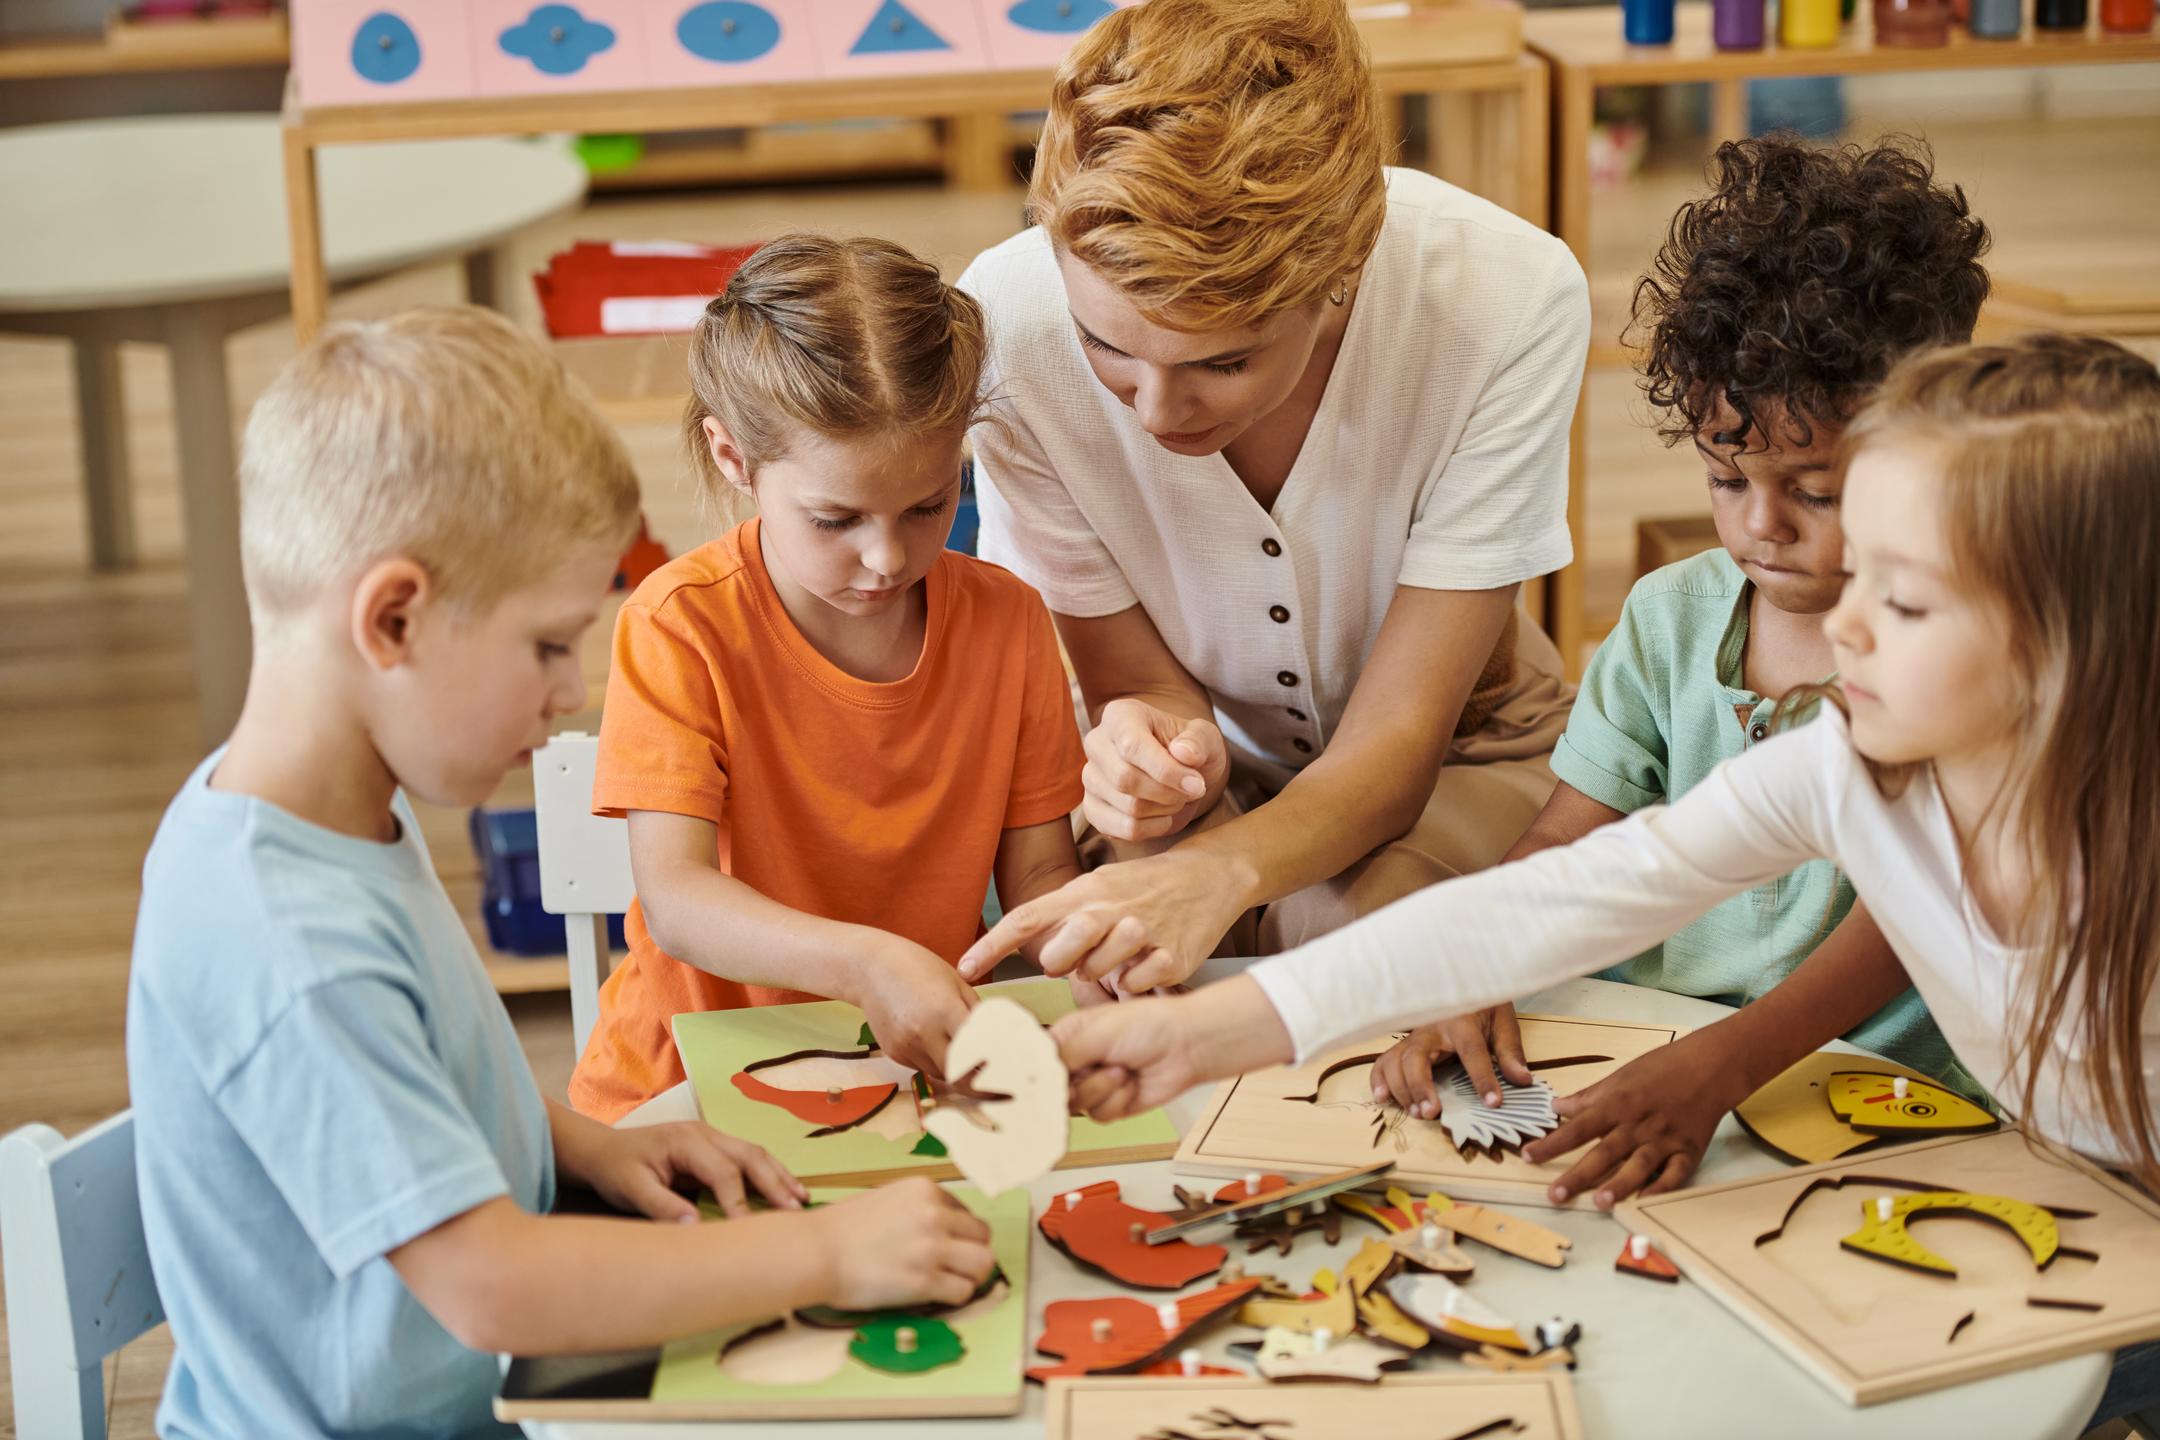 A teacher playing with a group of interracial children using educational toys, creating a fun and inclusive learning environment.